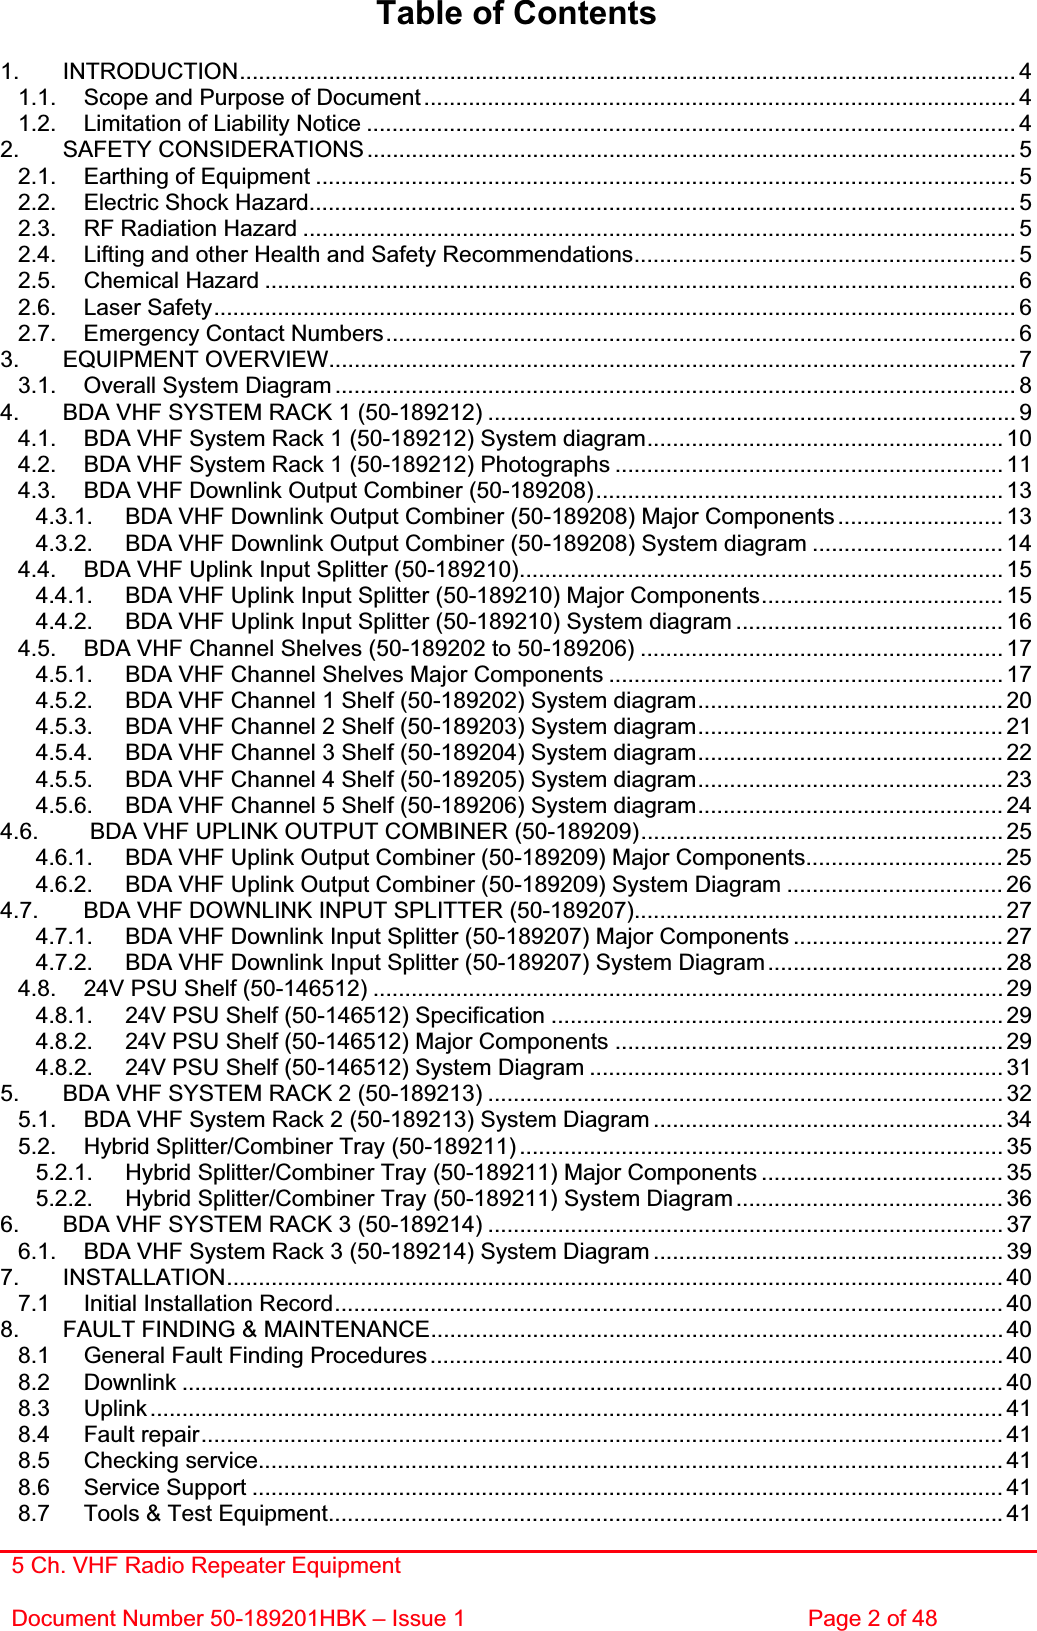 5 Ch. VHF Radio Repeater EquipmentDocument Number 50-189201HBK – Issue 1  Page 2 of 48 Table of Contents 1. INTRODUCTION.......................................................................................................................... 41.1. Scope and Purpose of Document ............................................................................................. 41.2. Limitation of Liability Notice ...................................................................................................... 42. SAFETY CONSIDERATIONS ...................................................................................................... 52.1. Earthing of Equipment .............................................................................................................. 52.2. Electric Shock Hazard............................................................................................................... 52.3. RF Radiation Hazard ................................................................................................................ 52.4. Lifting and other Health and Safety Recommendations............................................................ 52.5. Chemical Hazard ...................................................................................................................... 62.6. Laser Safety.............................................................................................................................. 62.7. Emergency Contact Numbers...................................................................................................63. EQUIPMENT OVERVIEW............................................................................................................ 73.1. Overall System Diagram ........................................................................................................... 84. BDA VHF SYSTEM RACK 1 (50-189212) ................................................................................... 94.1. BDA VHF System Rack 1 (50-189212) System diagram........................................................ 104.2. BDA VHF System Rack 1 (50-189212) Photographs ............................................................. 114.3. BDA VHF Downlink Output Combiner (50-189208)................................................................ 134.3.1. BDA VHF Downlink Output Combiner (50-189208) Major Components .......................... 134.3.2. BDA VHF Downlink Output Combiner (50-189208) System diagram .............................. 144.4. BDA VHF Uplink Input Splitter (50-189210)............................................................................ 154.4.1. BDA VHF Uplink Input Splitter (50-189210) Major Components...................................... 154.4.2. BDA VHF Uplink Input Splitter (50-189210) System diagram .......................................... 164.5. BDA VHF Channel Shelves (50-189202 to 50-189206) ......................................................... 174.5.1. BDA VHF Channel Shelves Major Components .............................................................. 174.5.2. BDA VHF Channel 1 Shelf (50-189202) System diagram................................................ 204.5.3. BDA VHF Channel 2 Shelf (50-189203) System diagram................................................ 214.5.4. BDA VHF Channel 3 Shelf (50-189204) System diagram................................................ 224.5.5. BDA VHF Channel 4 Shelf (50-189205) System diagram................................................ 234.5.6. BDA VHF Channel 5 Shelf (50-189206) System diagram................................................ 244.6.  BDA VHF UPLINK OUTPUT COMBINER (50-189209)......................................................... 254.6.1. BDA VHF Uplink Output Combiner (50-189209) Major Components............................... 254.6.2. BDA VHF Uplink Output Combiner (50-189209) System Diagram .................................. 264.7. BDA VHF DOWNLINK INPUT SPLITTER (50-189207).......................................................... 274.7.1. BDA VHF Downlink Input Splitter (50-189207) Major Components ................................. 274.7.2. BDA VHF Downlink Input Splitter (50-189207) System Diagram..................................... 284.8. 24V PSU Shelf (50-146512) ...................................................................................................294.8.1. 24V PSU Shelf (50-146512) Specification ....................................................................... 294.8.2. 24V PSU Shelf (50-146512) Major Components ............................................................. 294.8.2. 24V PSU Shelf (50-146512) System Diagram ................................................................. 315. BDA VHF SYSTEM RACK 2 (50-189213) ................................................................................. 325.1. BDA VHF System Rack 2 (50-189213) System Diagram ....................................................... 345.2. Hybrid Splitter/Combiner Tray (50-189211) ............................................................................ 355.2.1. Hybrid Splitter/Combiner Tray (50-189211) Major Components ...................................... 355.2.2. Hybrid Splitter/Combiner Tray (50-189211) System Diagram.......................................... 366. BDA VHF SYSTEM RACK 3 (50-189214) ................................................................................. 376.1. BDA VHF System Rack 3 (50-189214) System Diagram ....................................................... 397. INSTALLATION.......................................................................................................................... 407.1 Initial Installation Record......................................................................................................... 408. FAULT FINDING &amp; MAINTENANCE.......................................................................................... 408.1 General Fault Finding Procedures.......................................................................................... 408.2 Downlink ................................................................................................................................. 408.3 Uplink...................................................................................................................................... 418.4 Fault repair.............................................................................................................................. 418.5 Checking service..................................................................................................................... 418.6 Service Support ...................................................................................................................... 418.7 Tools &amp; Test Equipment.......................................................................................................... 41